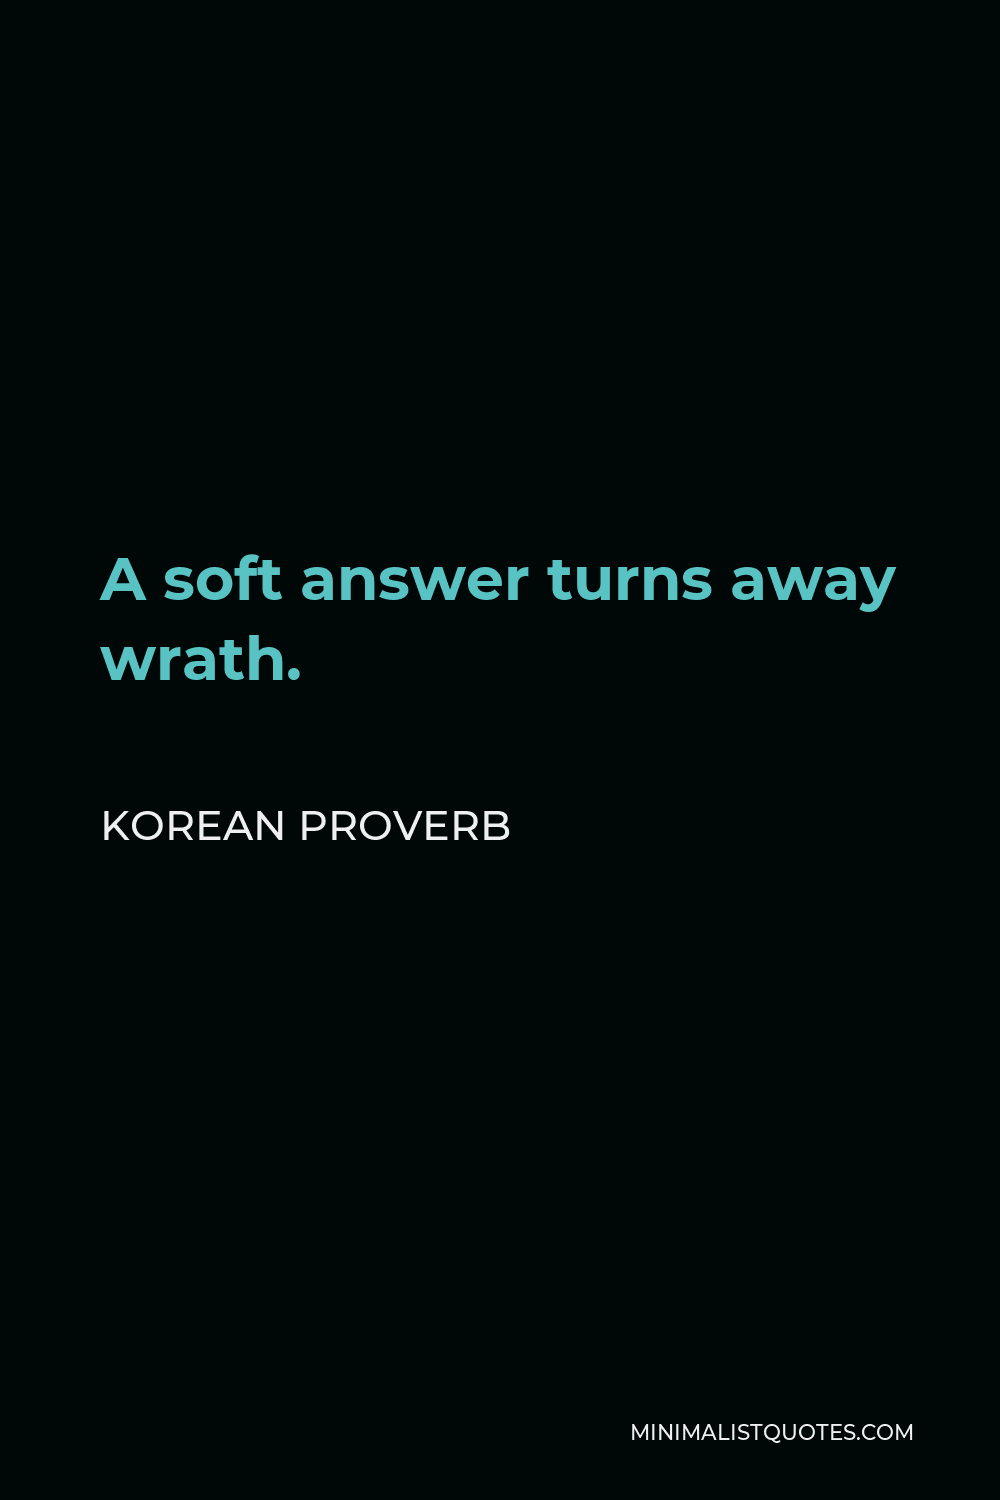 Korean Proverb Quote - A soft answer turns away wrath.